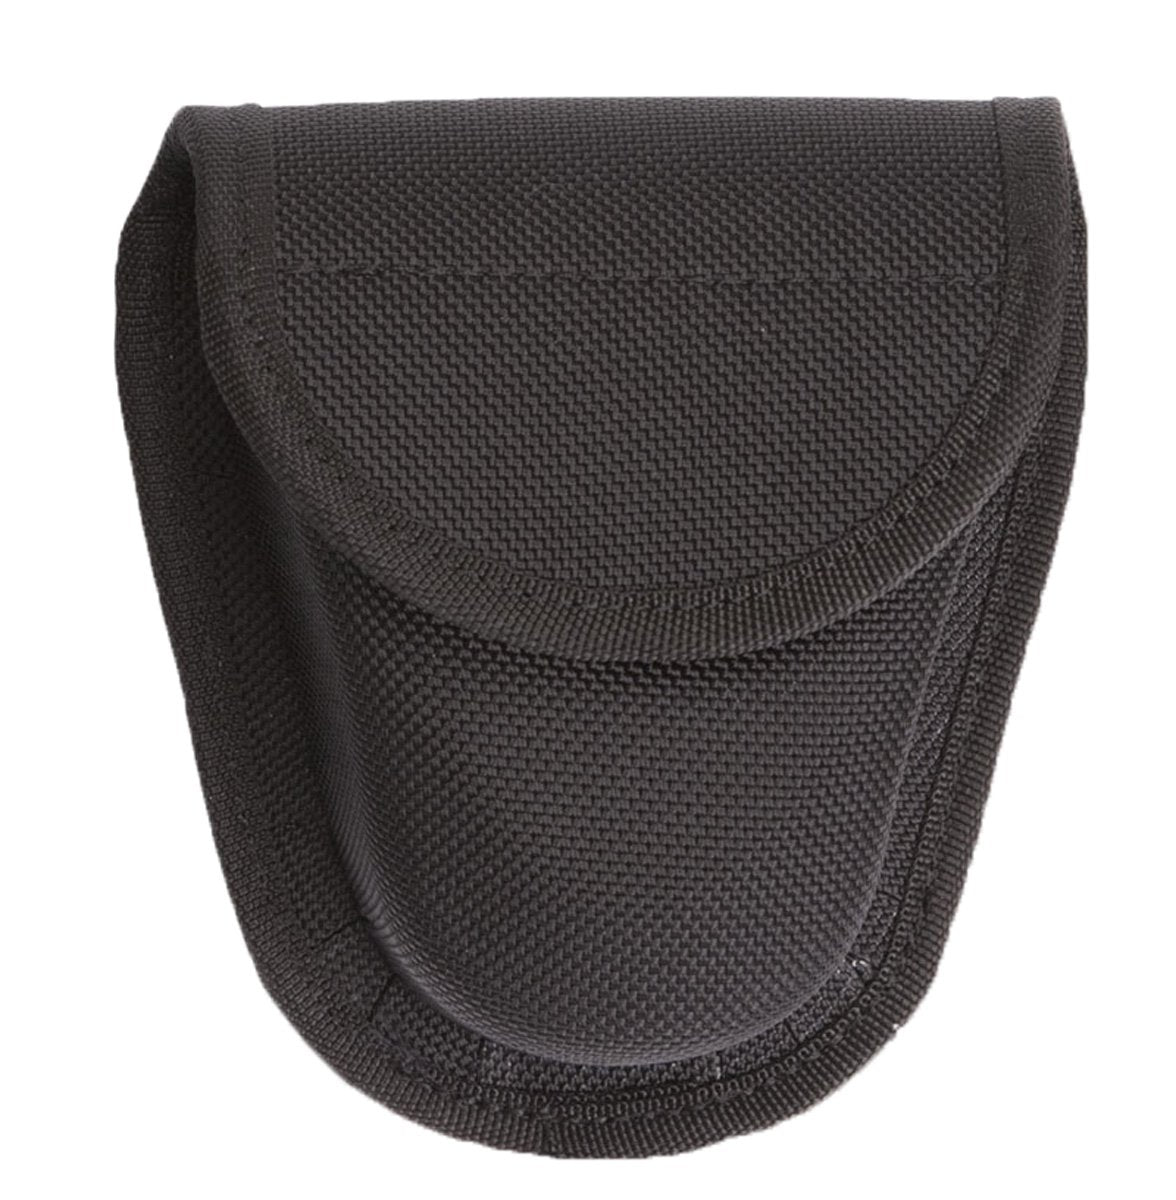 CUFF CASE FOR SYSTEM OR BELT